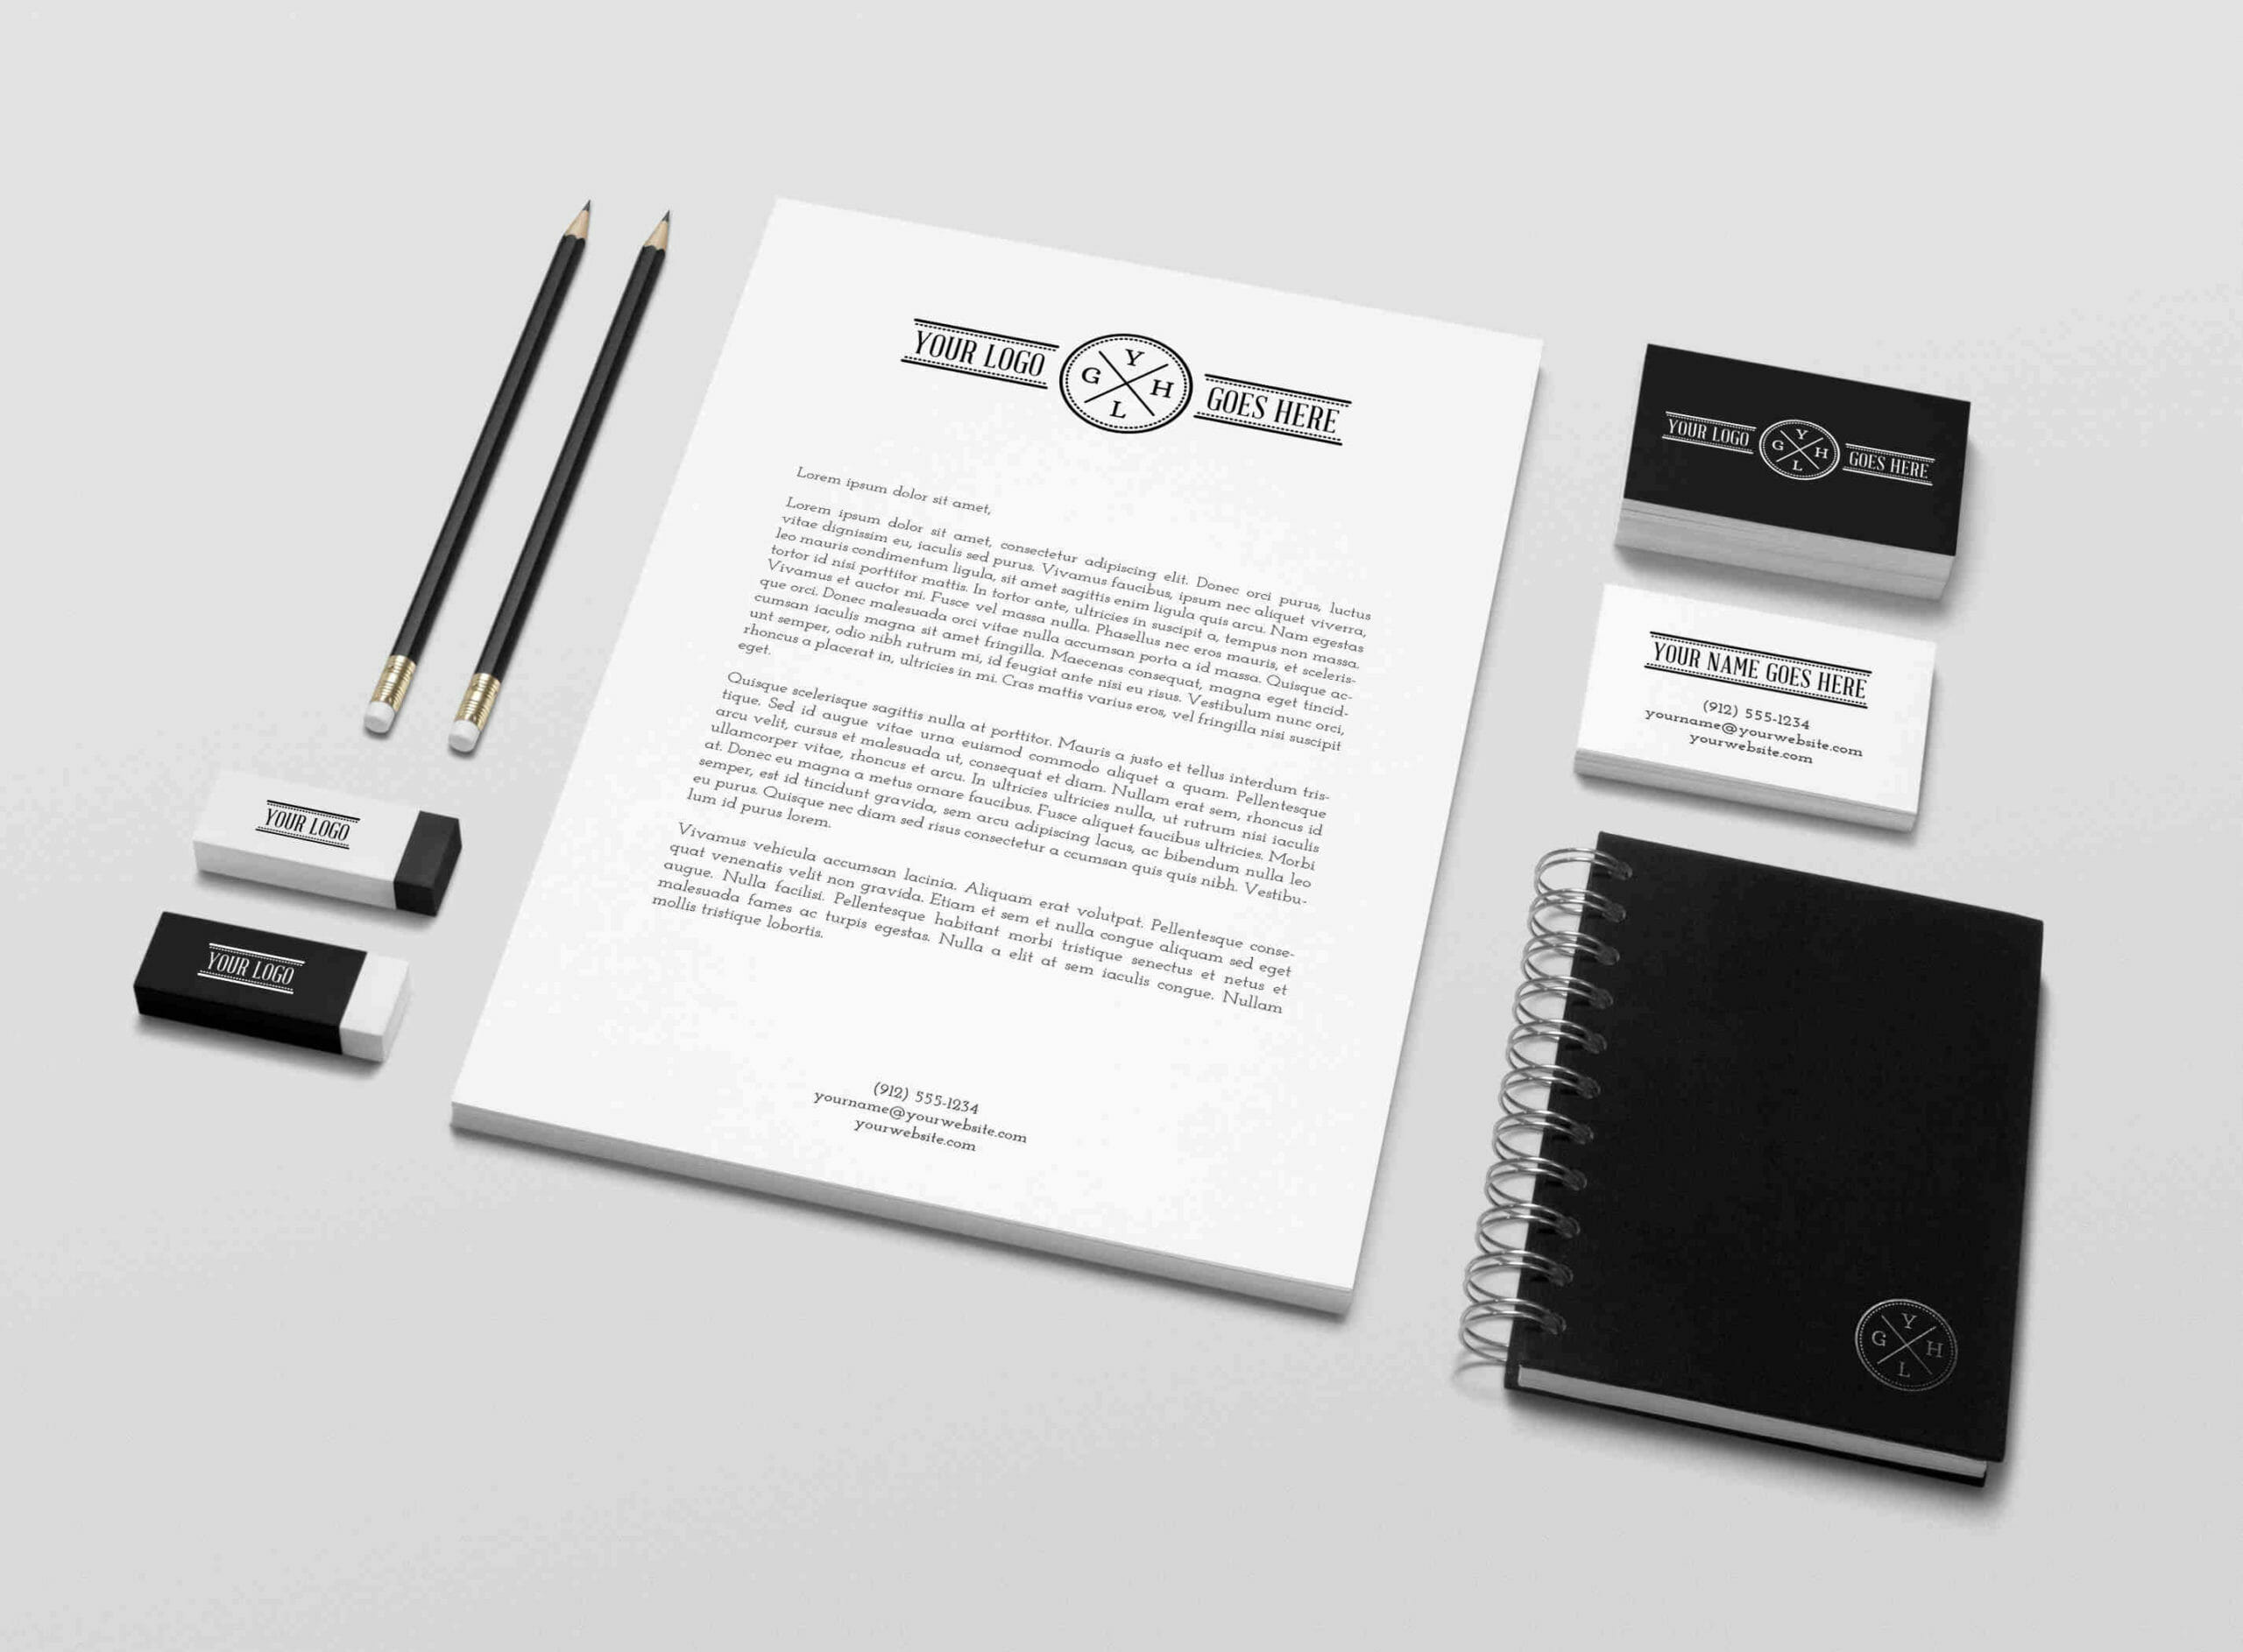 Download Clean Branding Identity Mockup Vol 4 Awesome Mockups